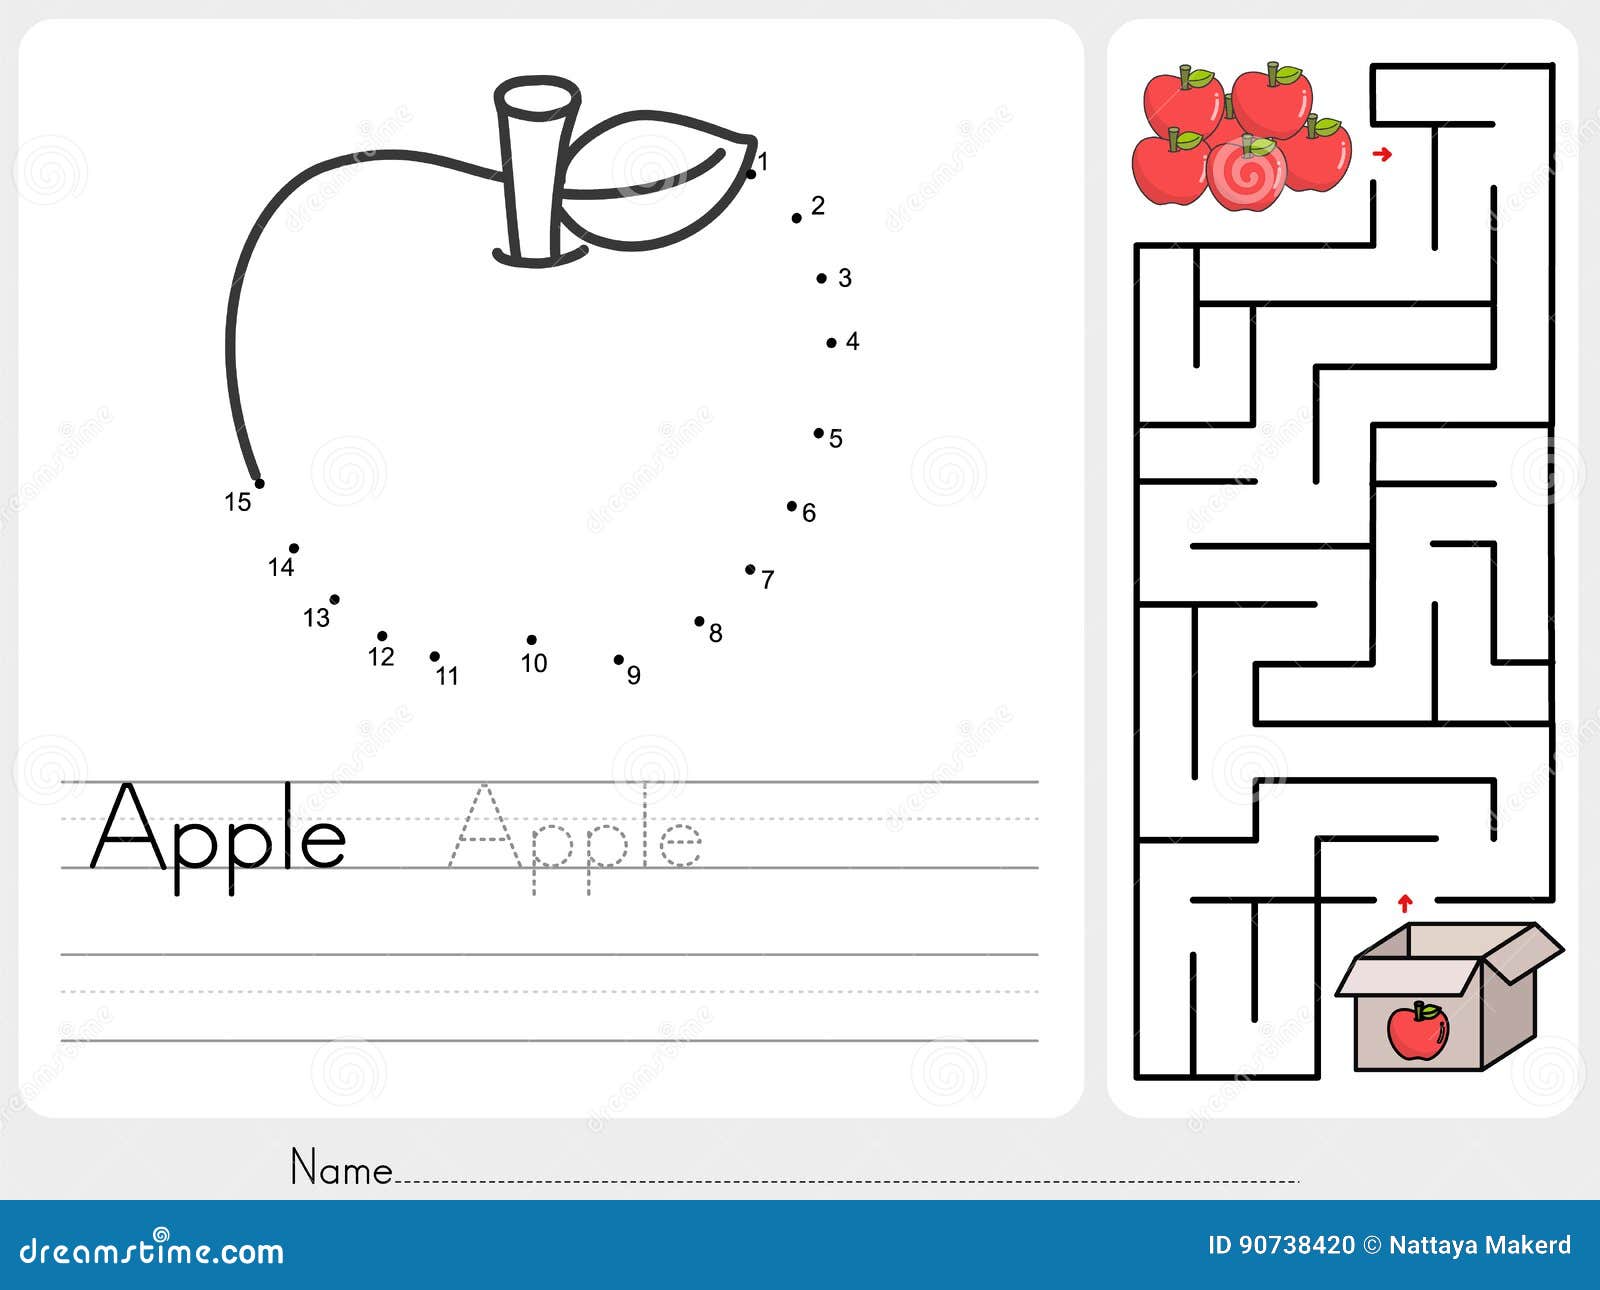 connect dots and pick apple box maze game - worksheet for education